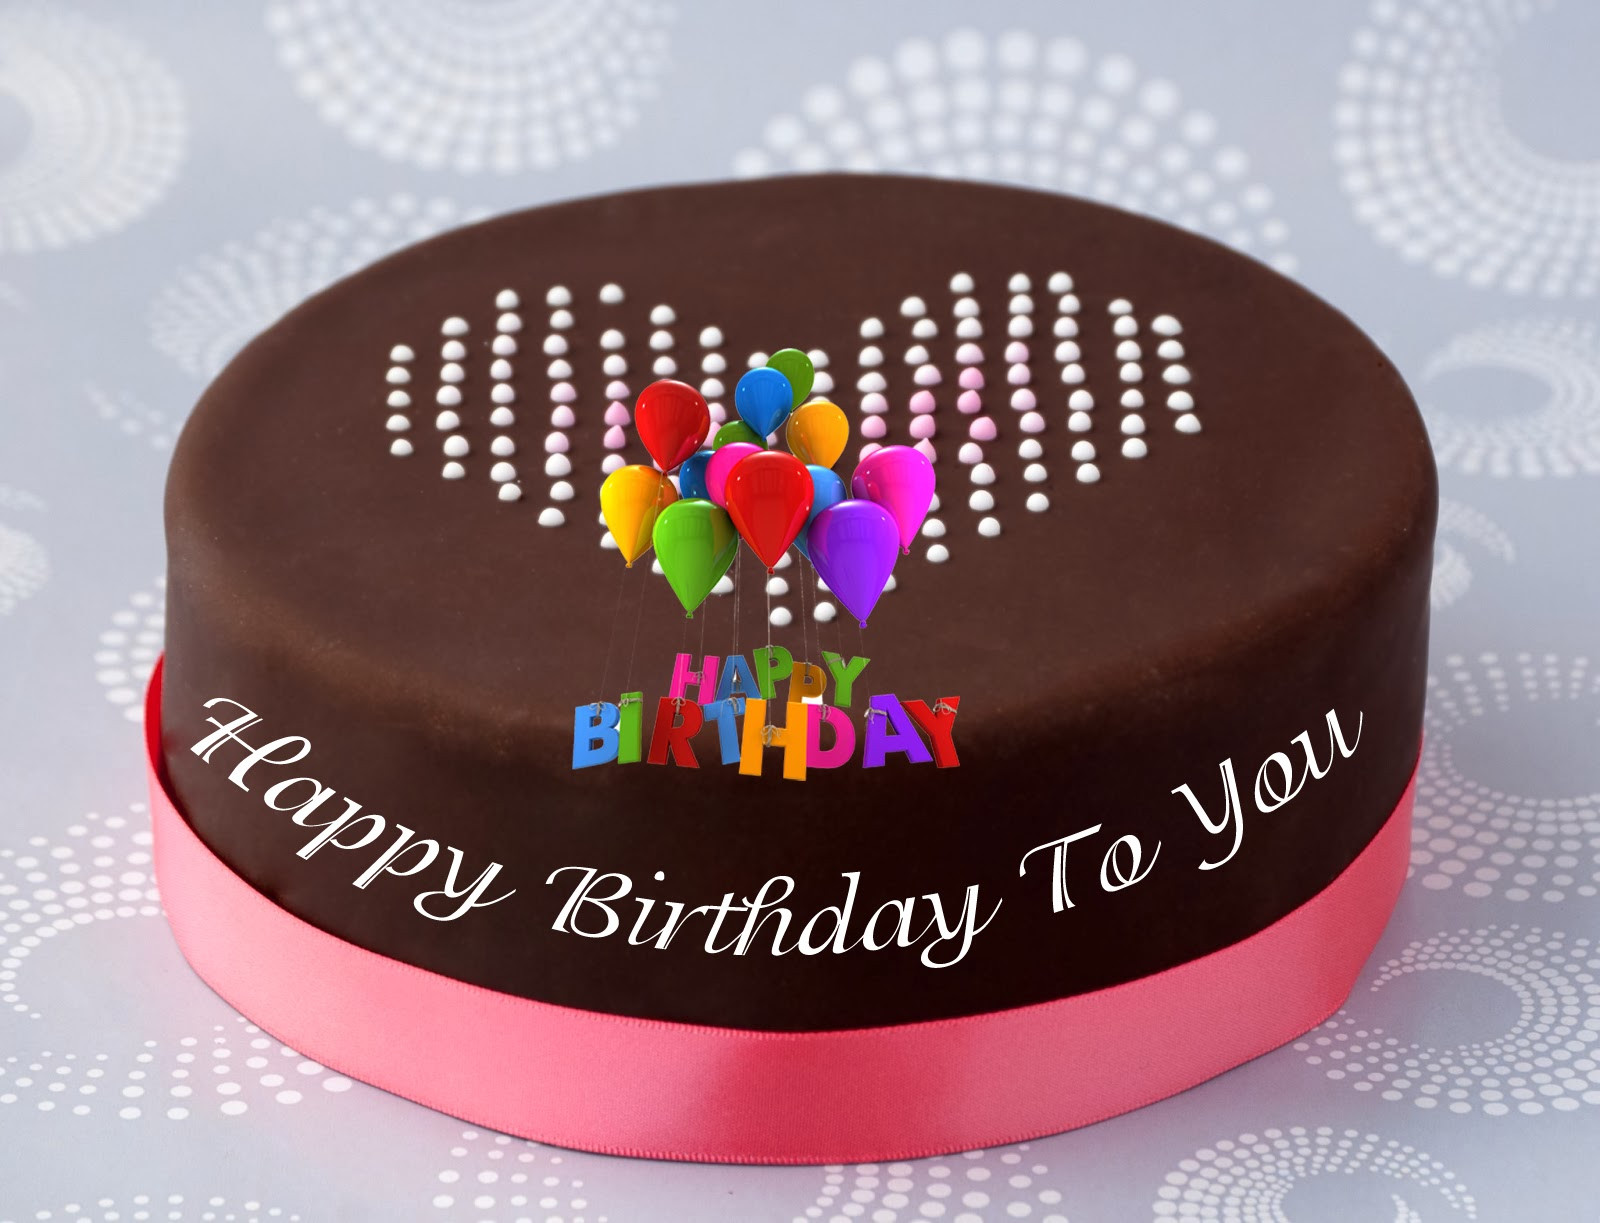 Birthday Cake Picture Free Download
 Lovable Happy Birthday Greetings free